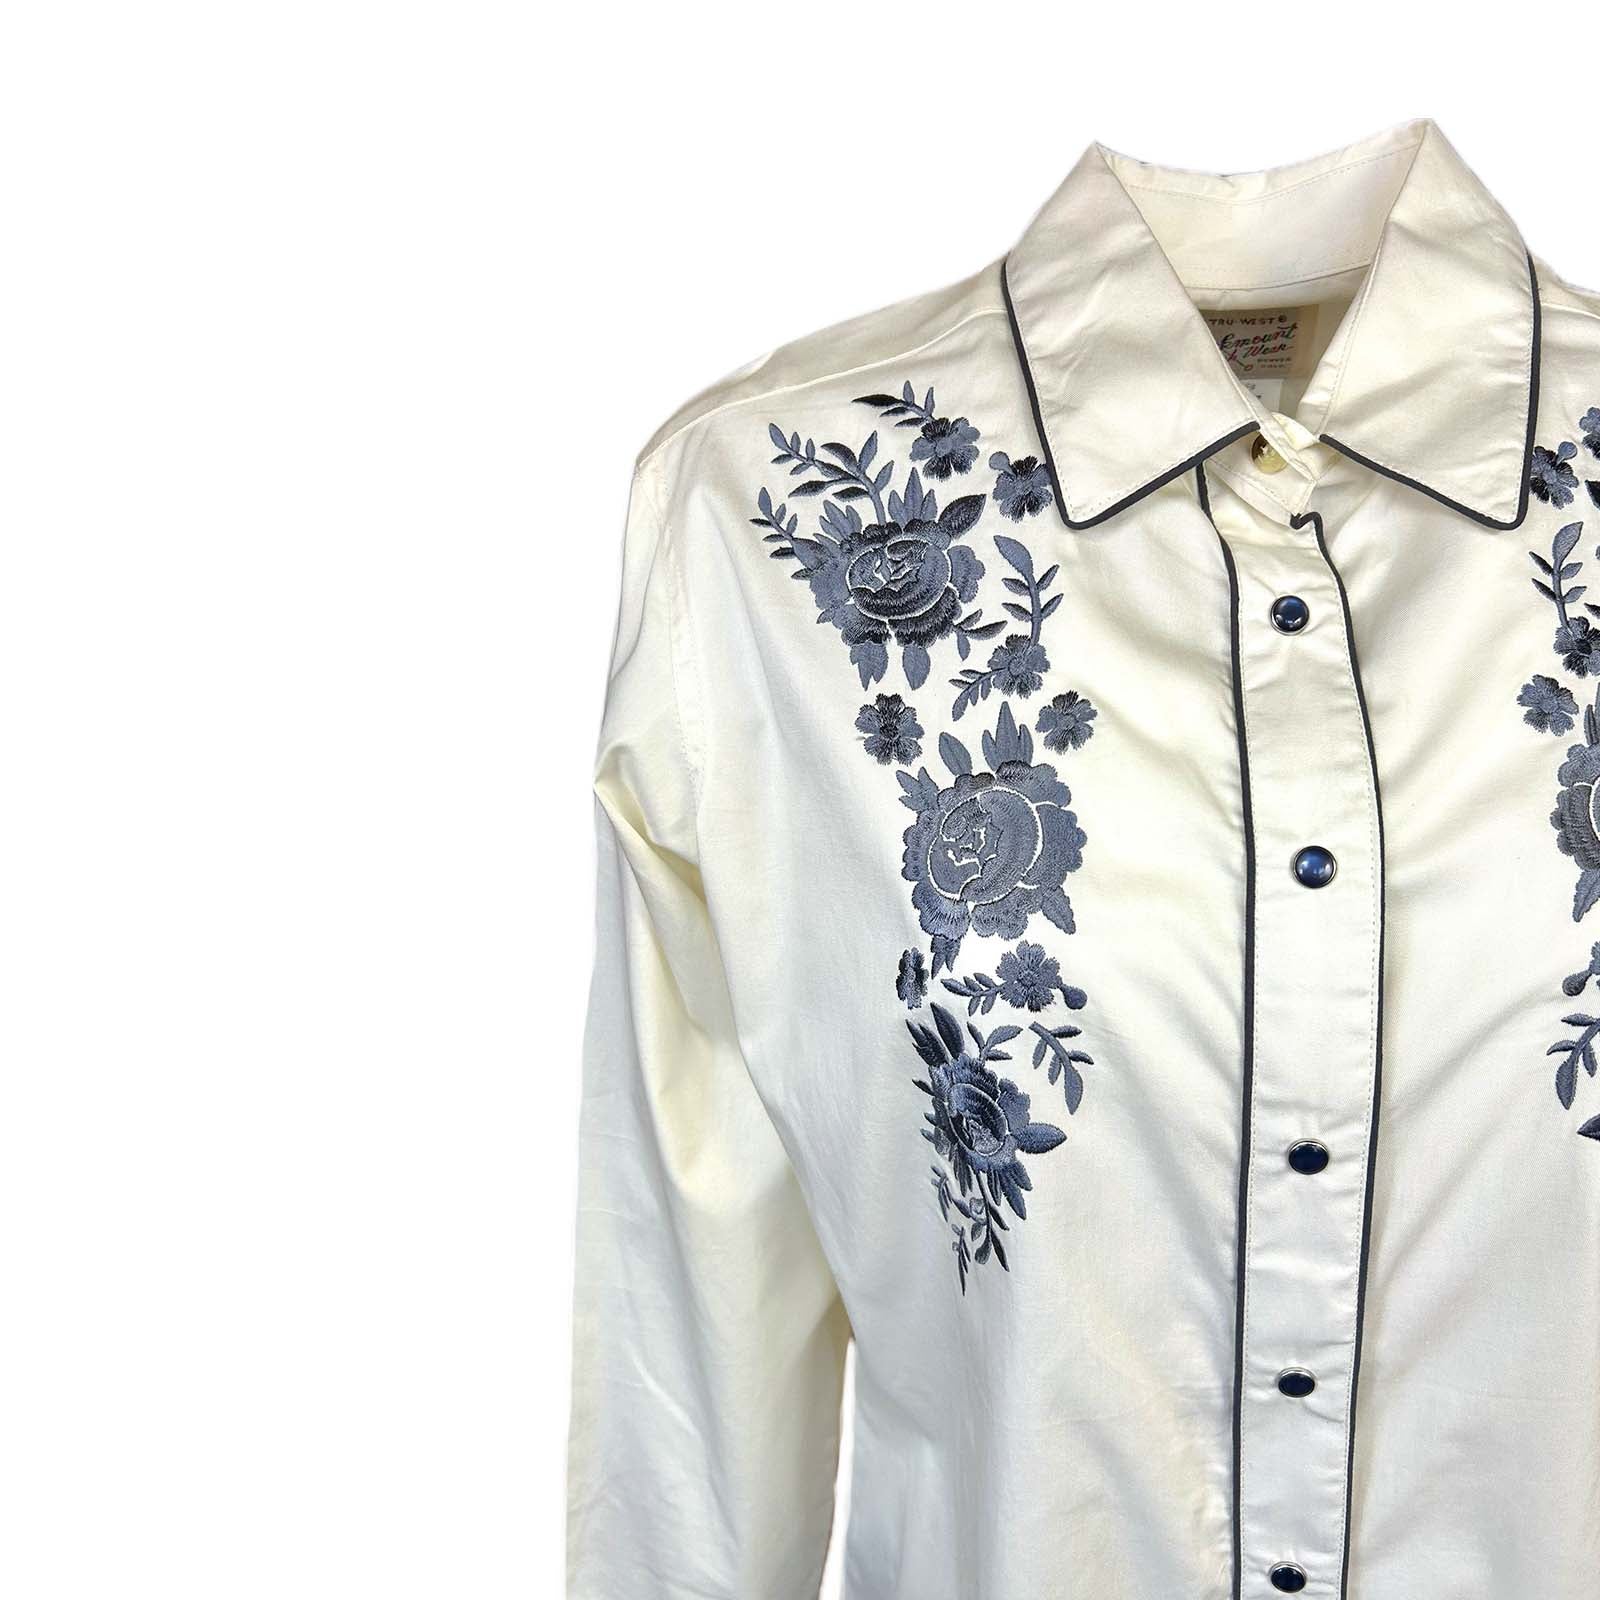 Women's Vintage Cascading Floral Embroidery Ivory Western Shirt